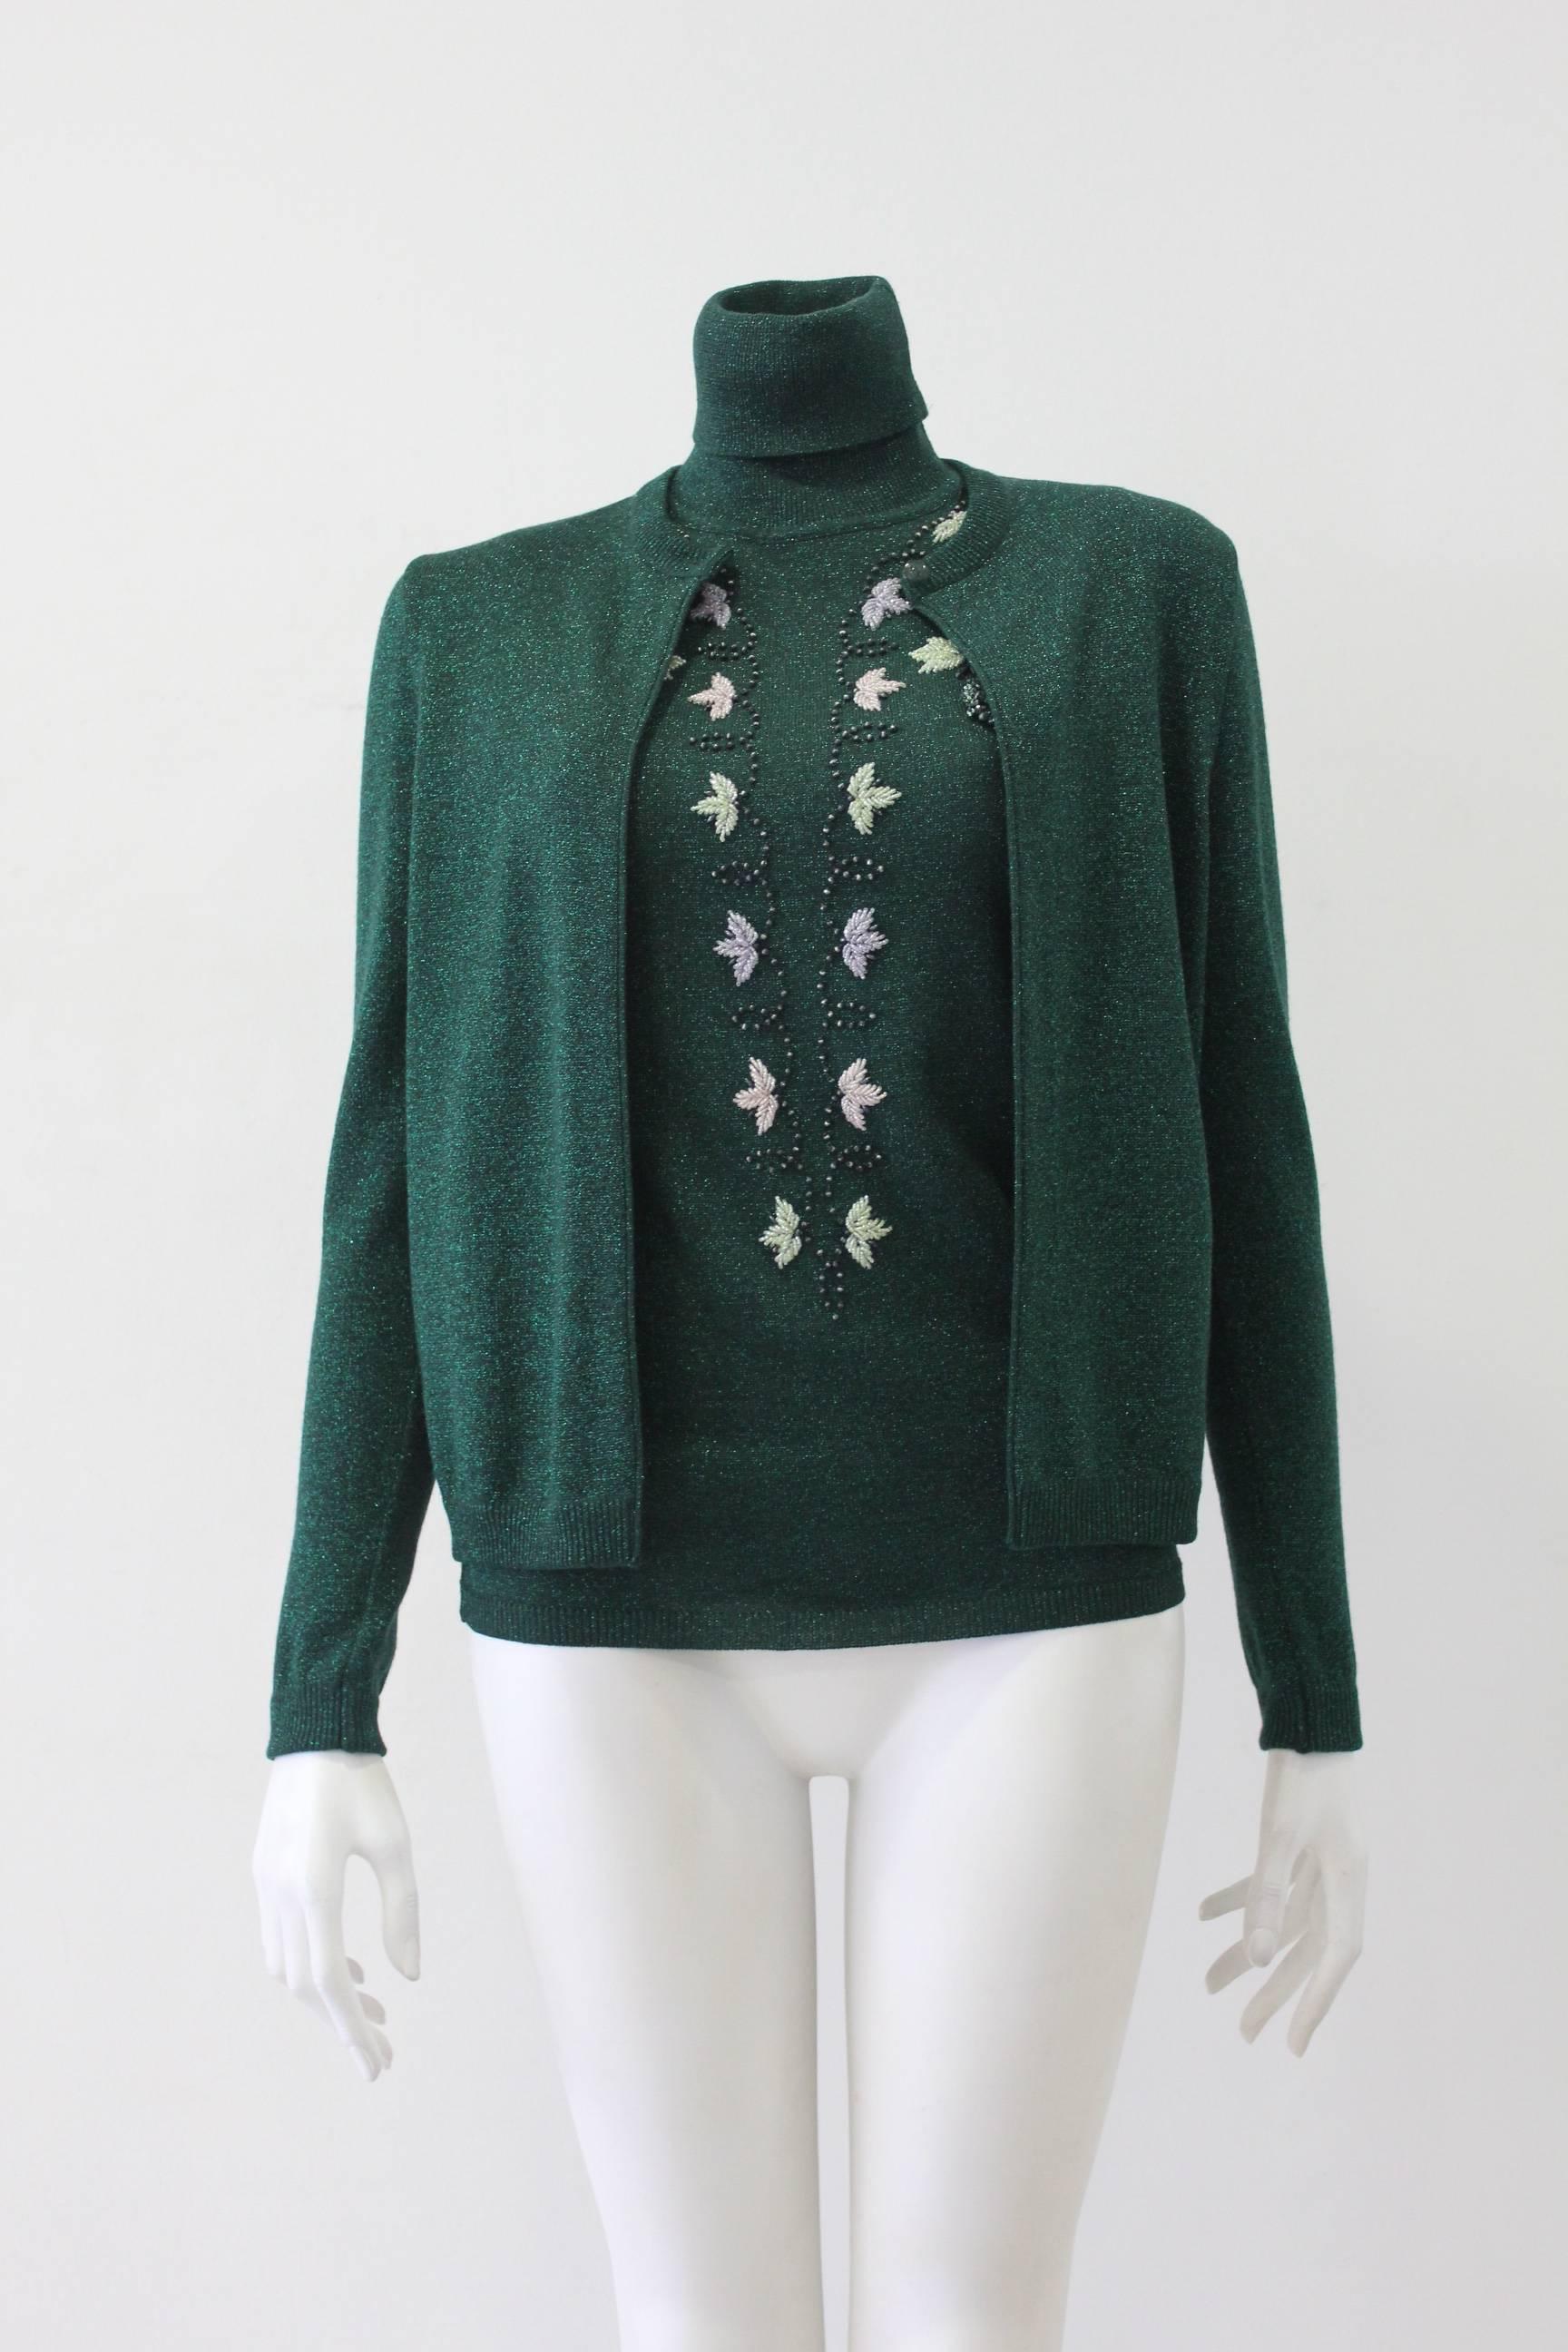 Women's Gianni Versace Couture Lurex Cardigan Fall 1997 For Sale